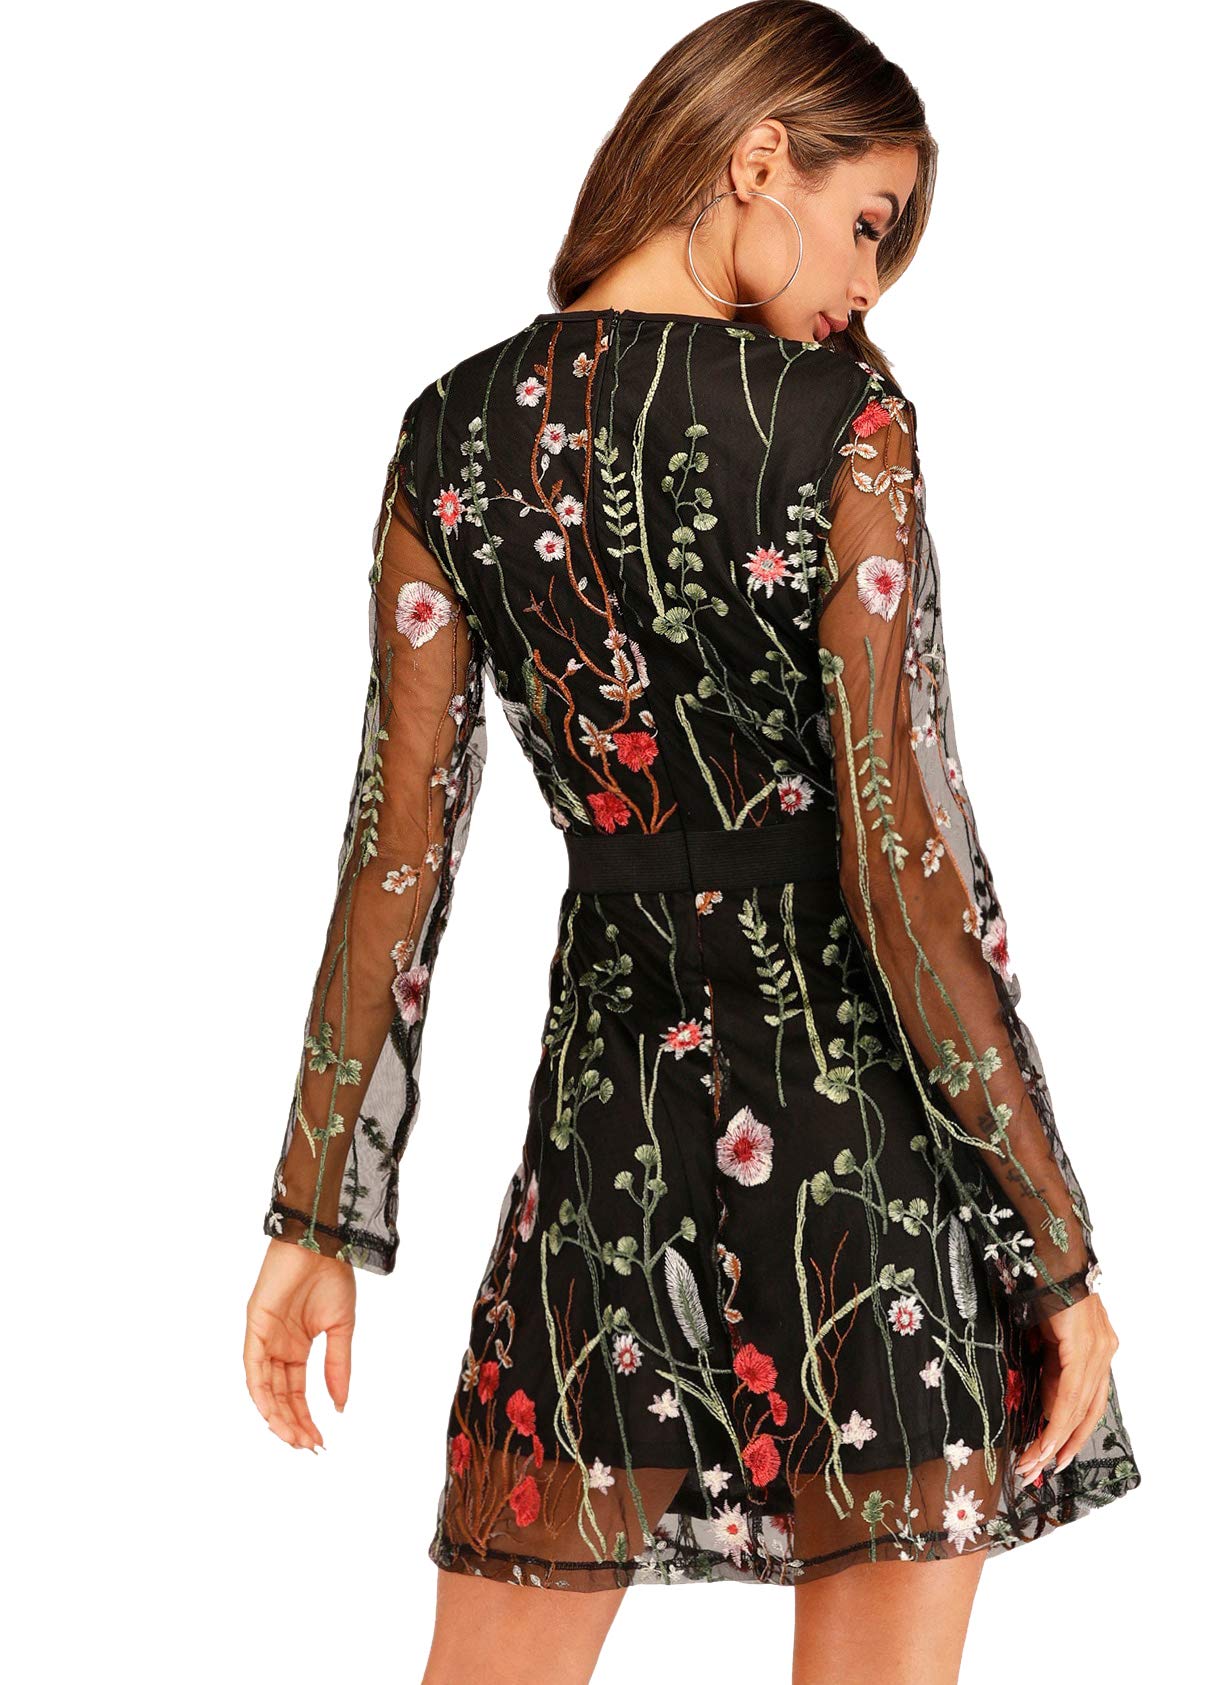 Milumia Women's Floral Embroidery Mesh Round Neck Tunic Party Dress